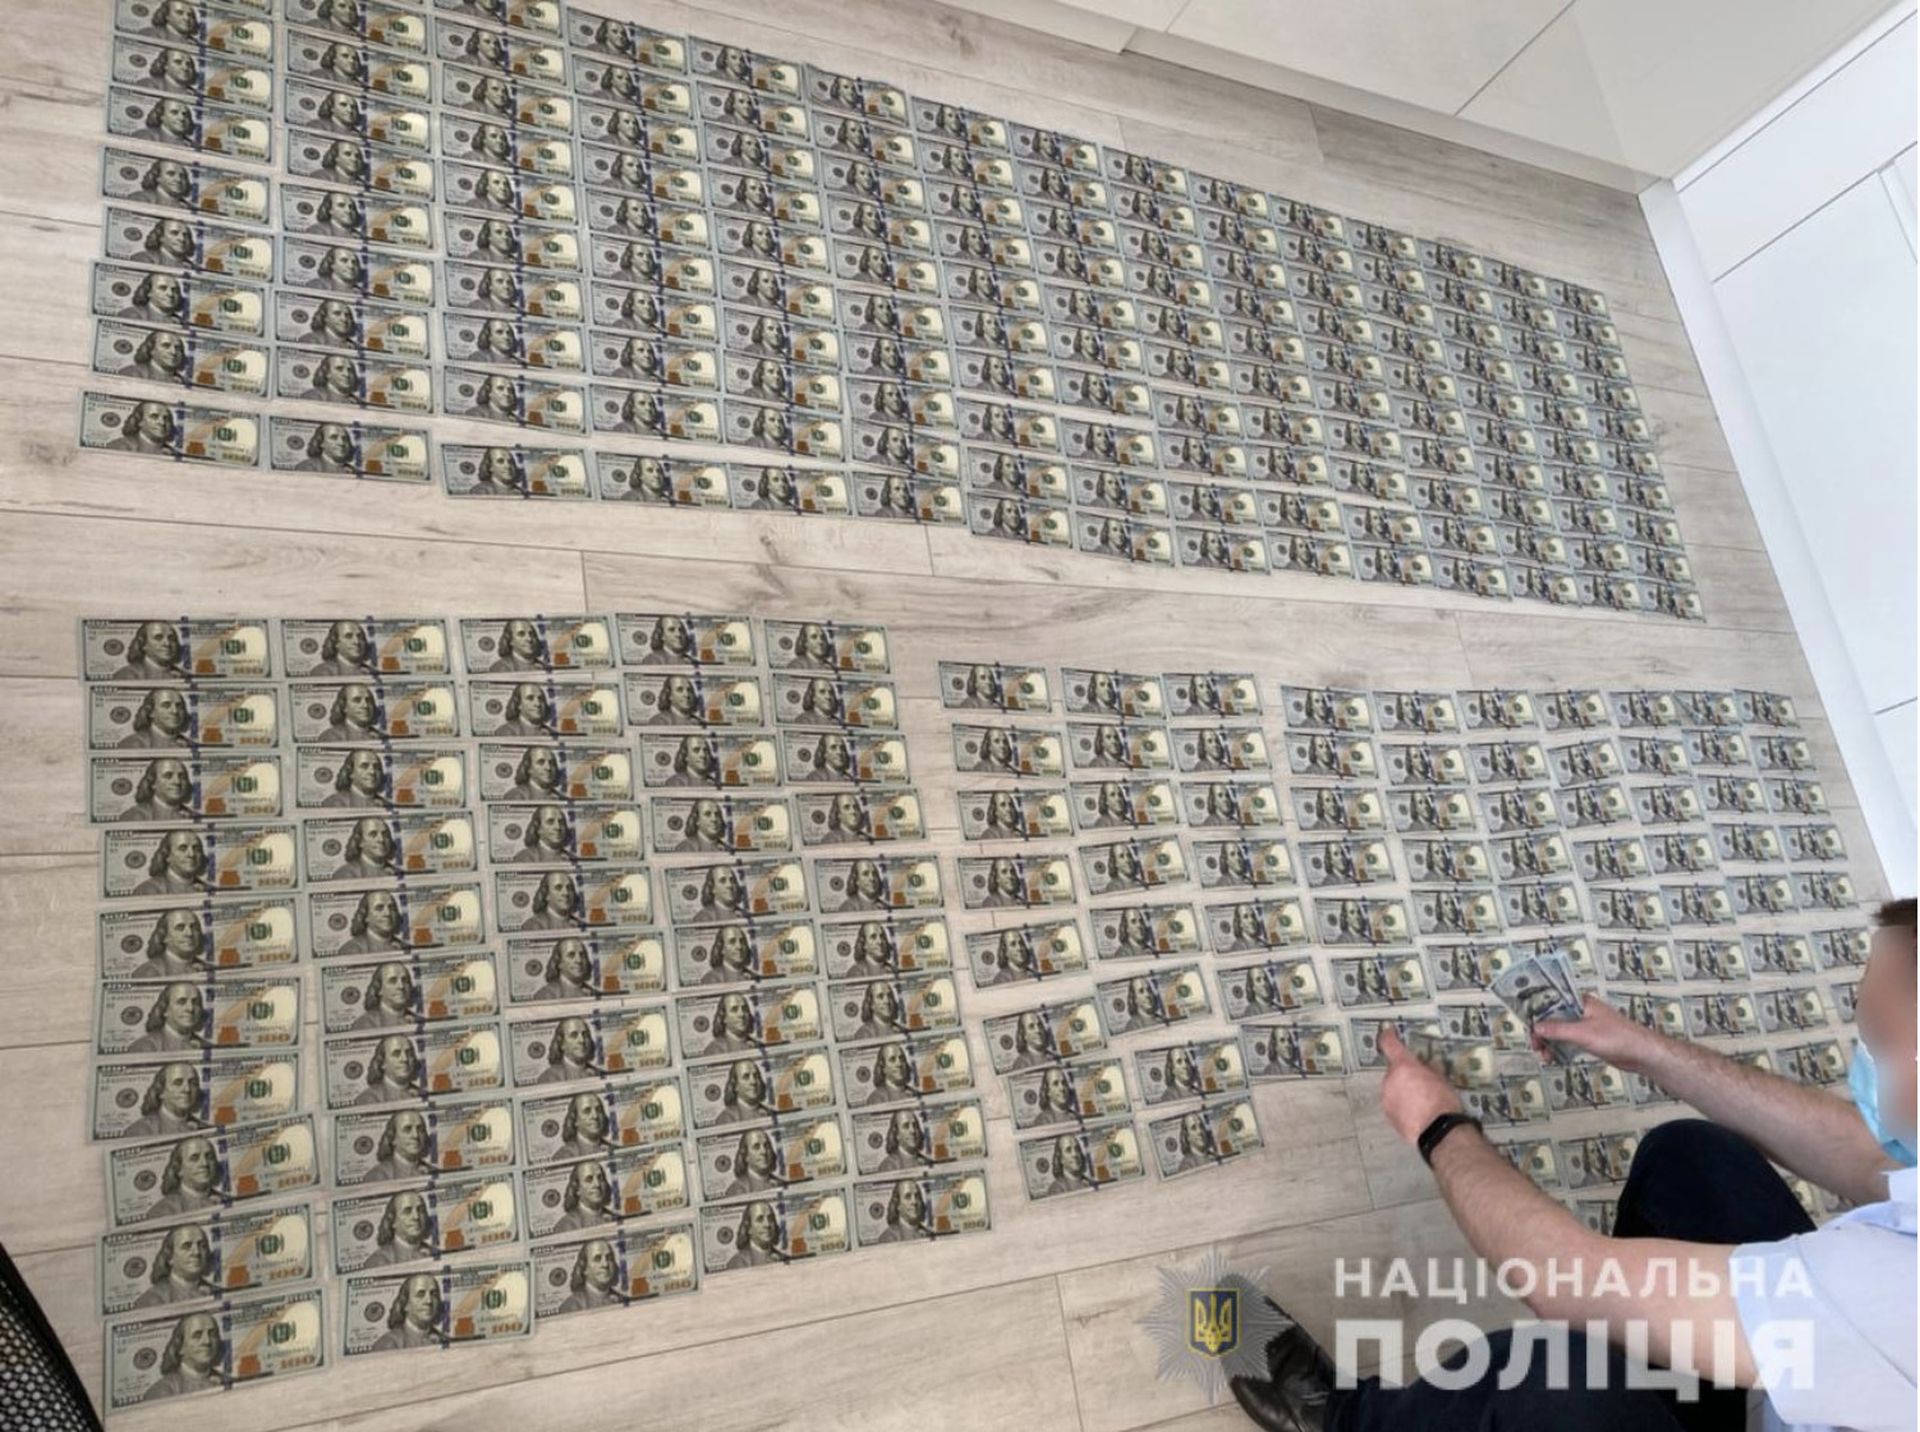 Ukrainian authorities display seized money in a June 15 raid that resulted in the arrest of six individuals alleged to be part of the Cl0p ransomware gang. (Credit: Ukrainian Cyber Police)